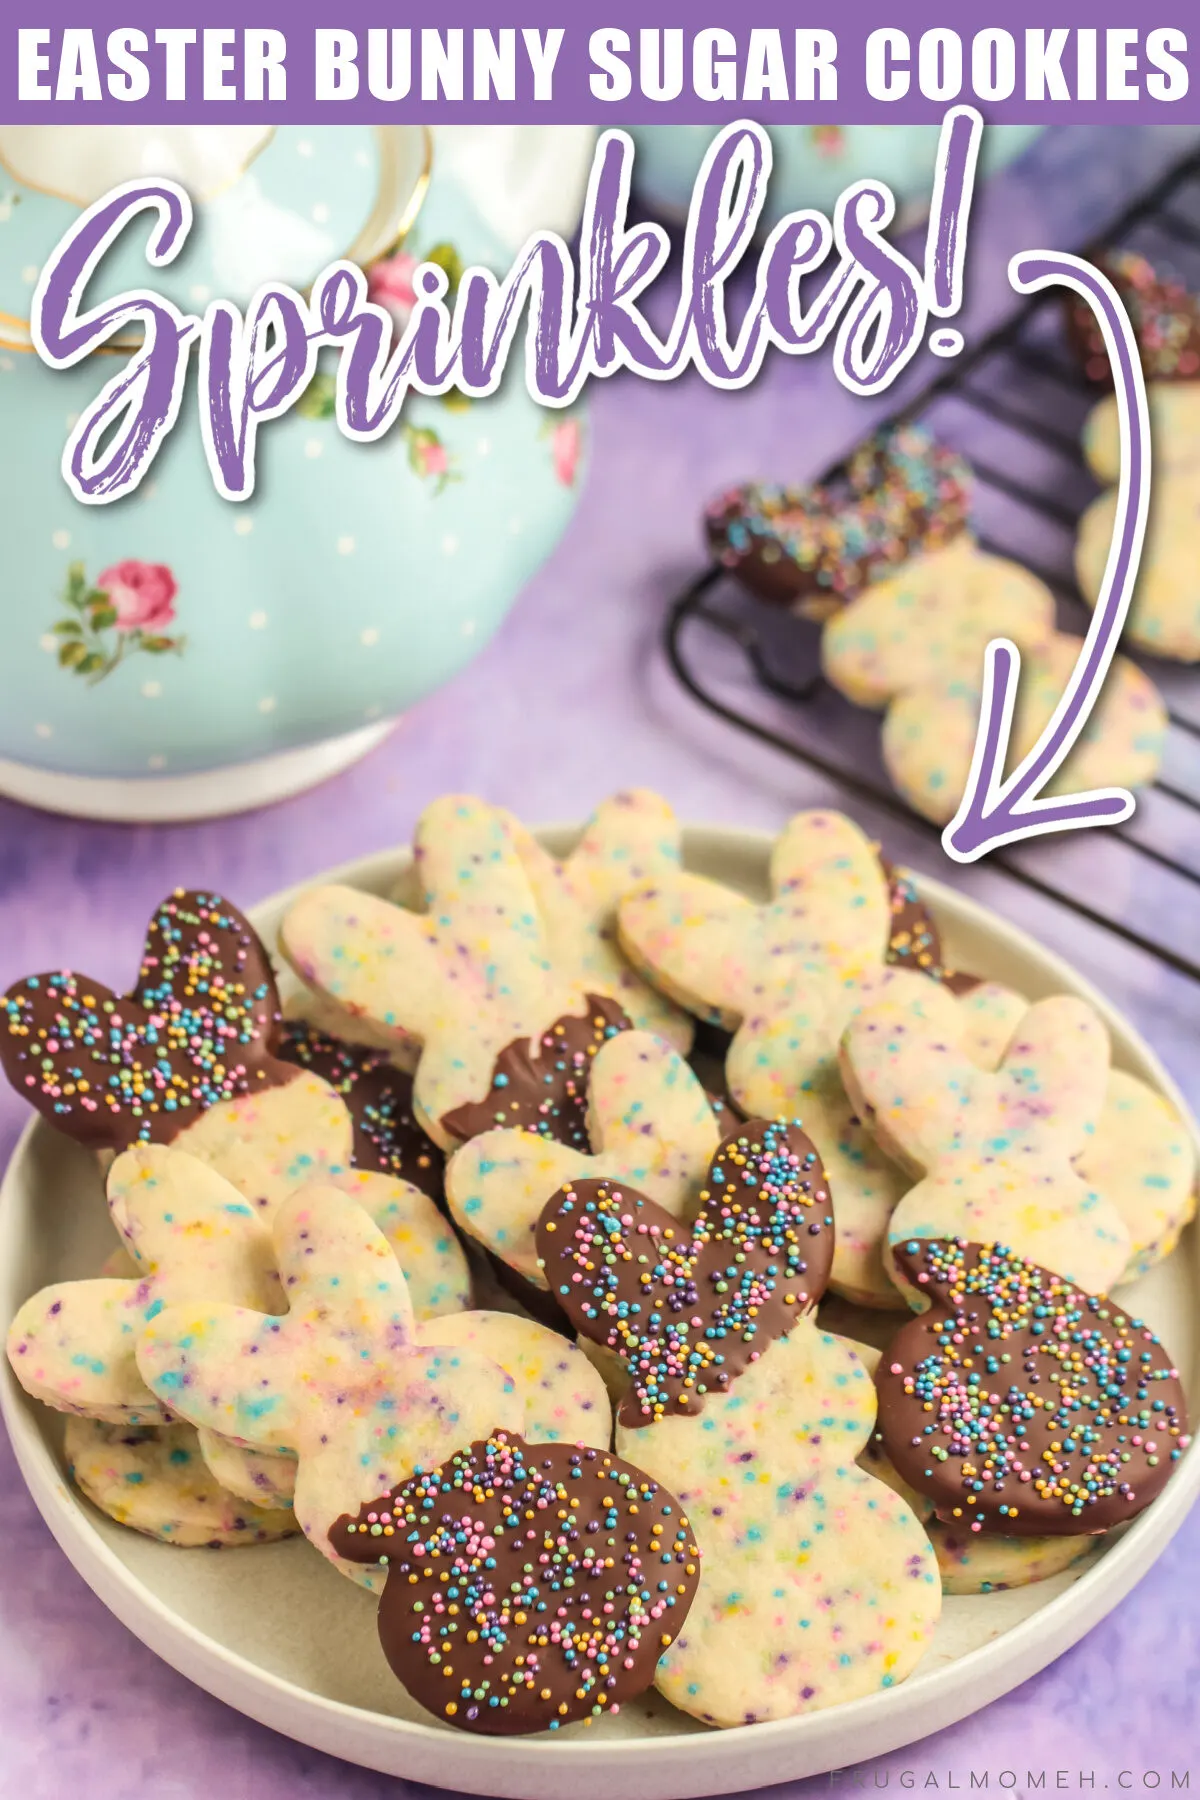 Delicious chocolate dipped Easter bunny sugar cookies complete with sprinkles that are the perfect addition to your Easter dessert table.